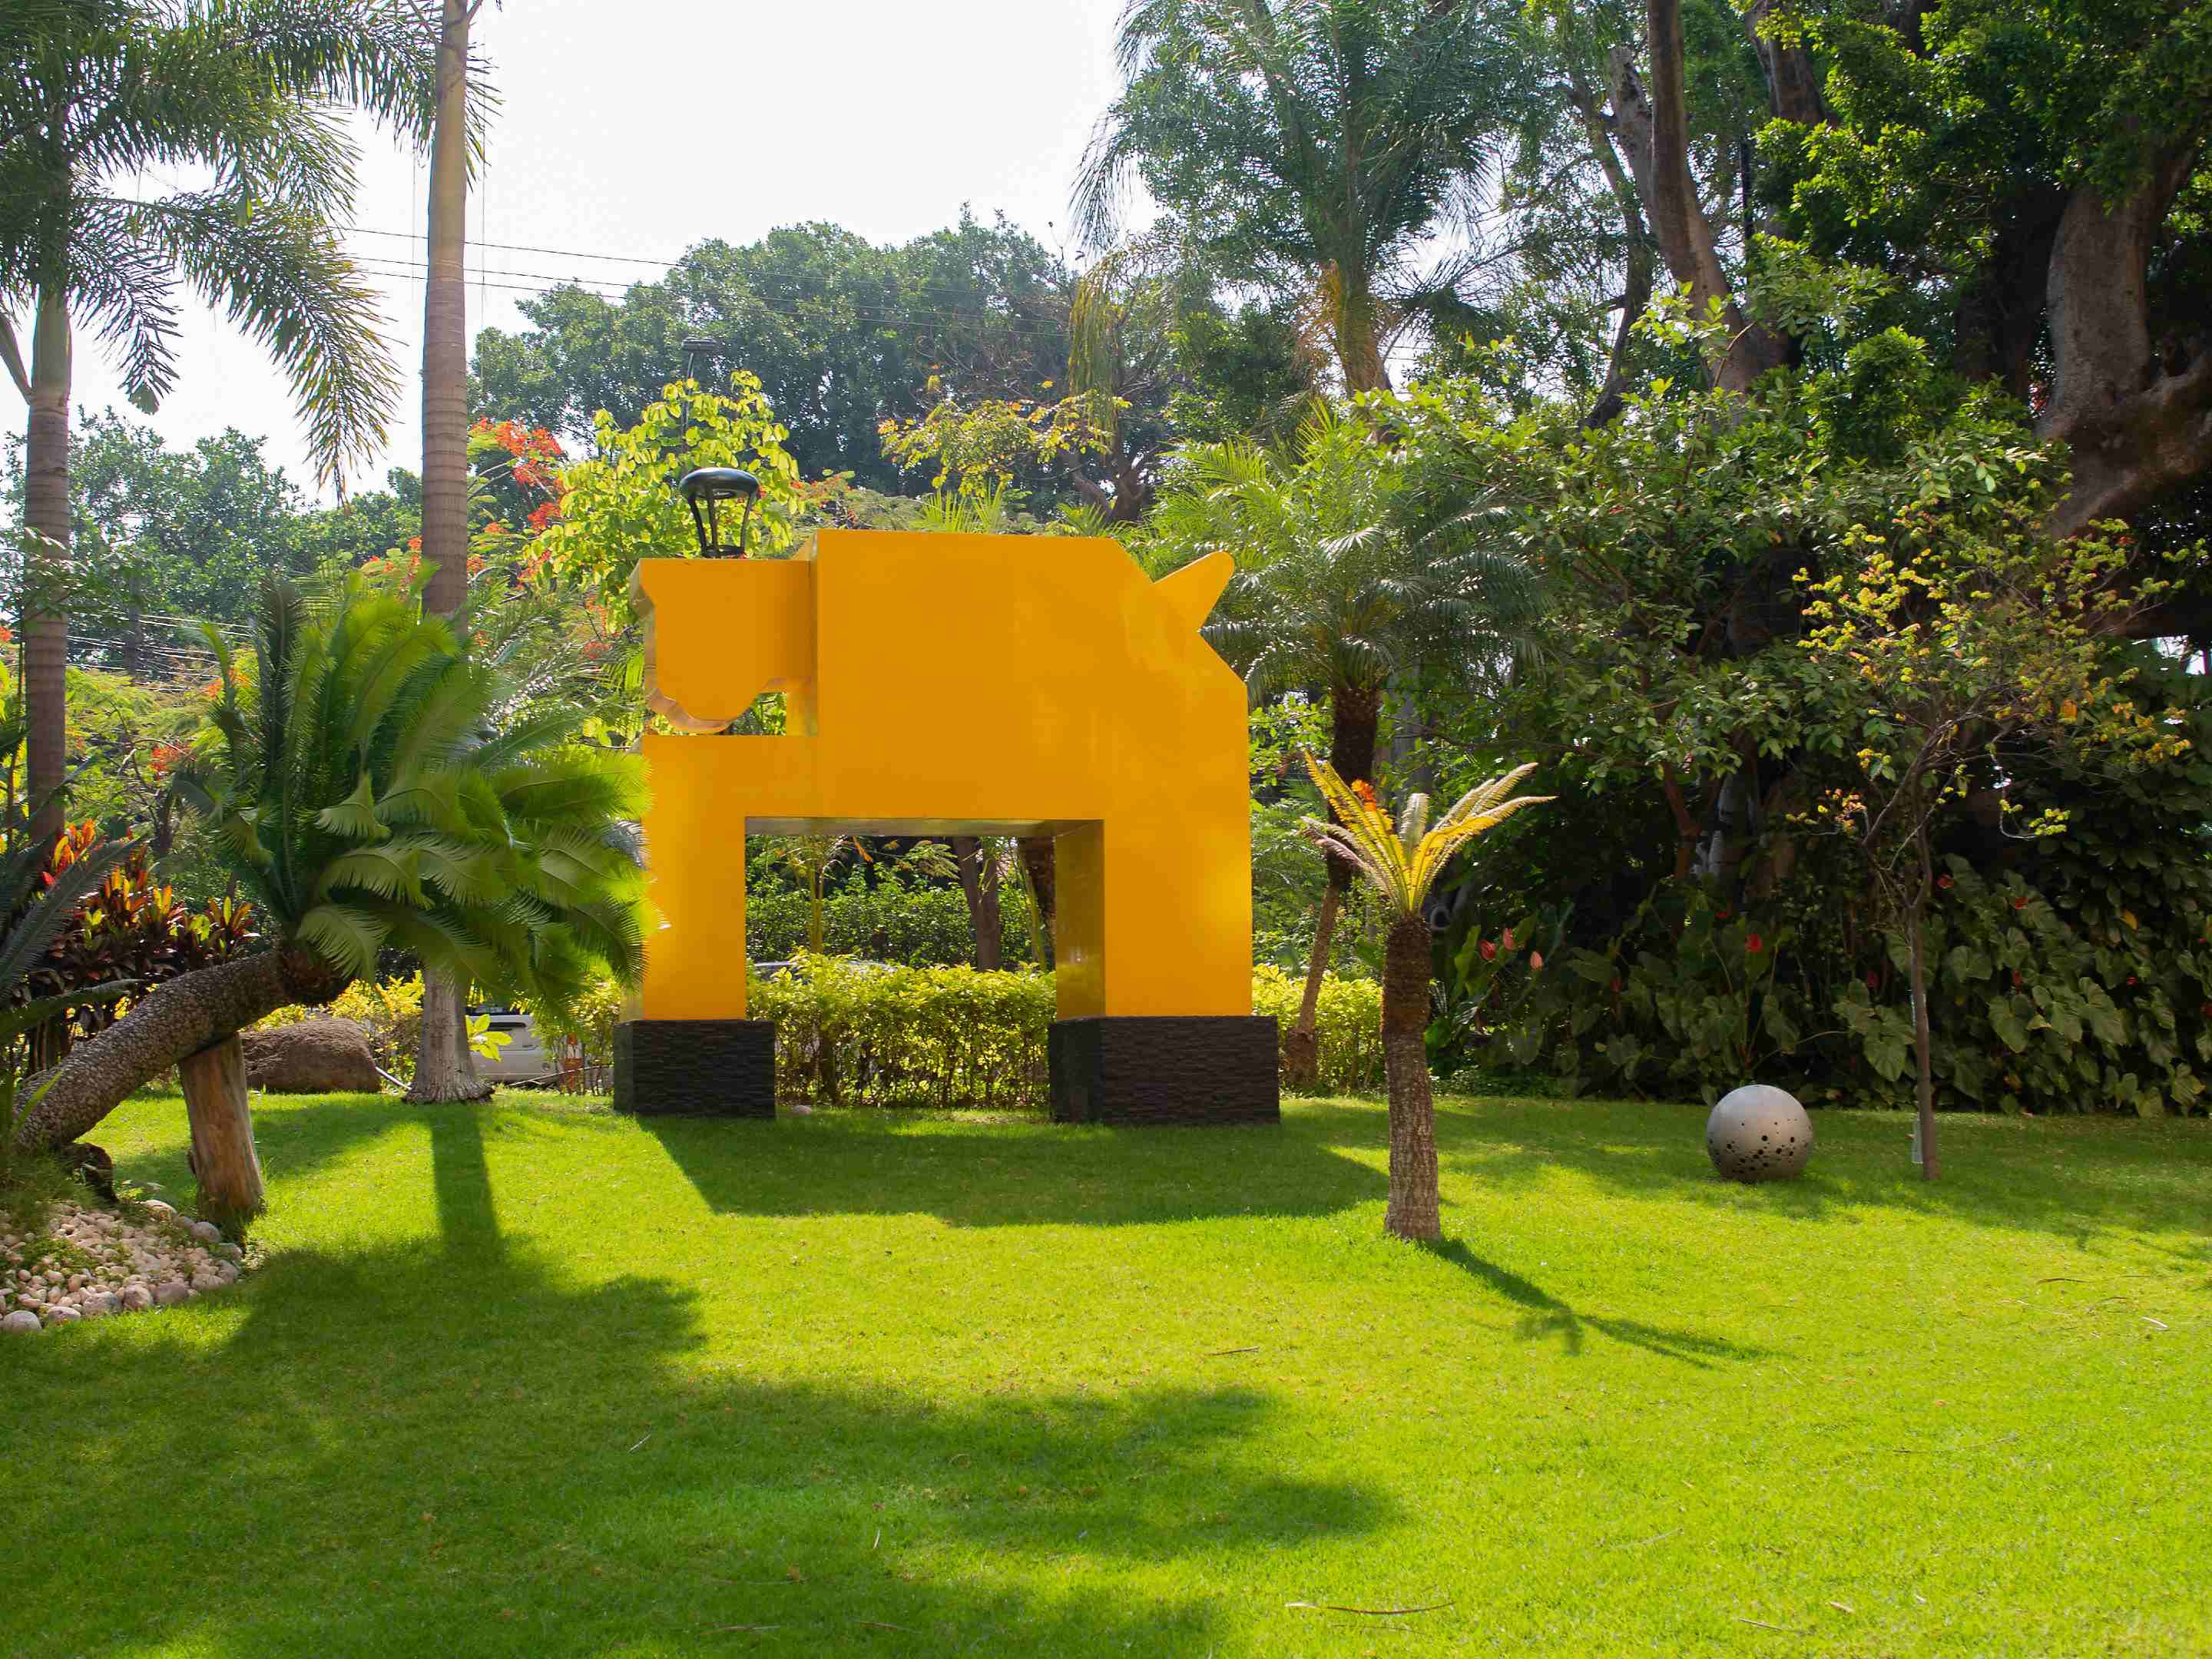 Enjoy our gardens and take photos in our sculptures